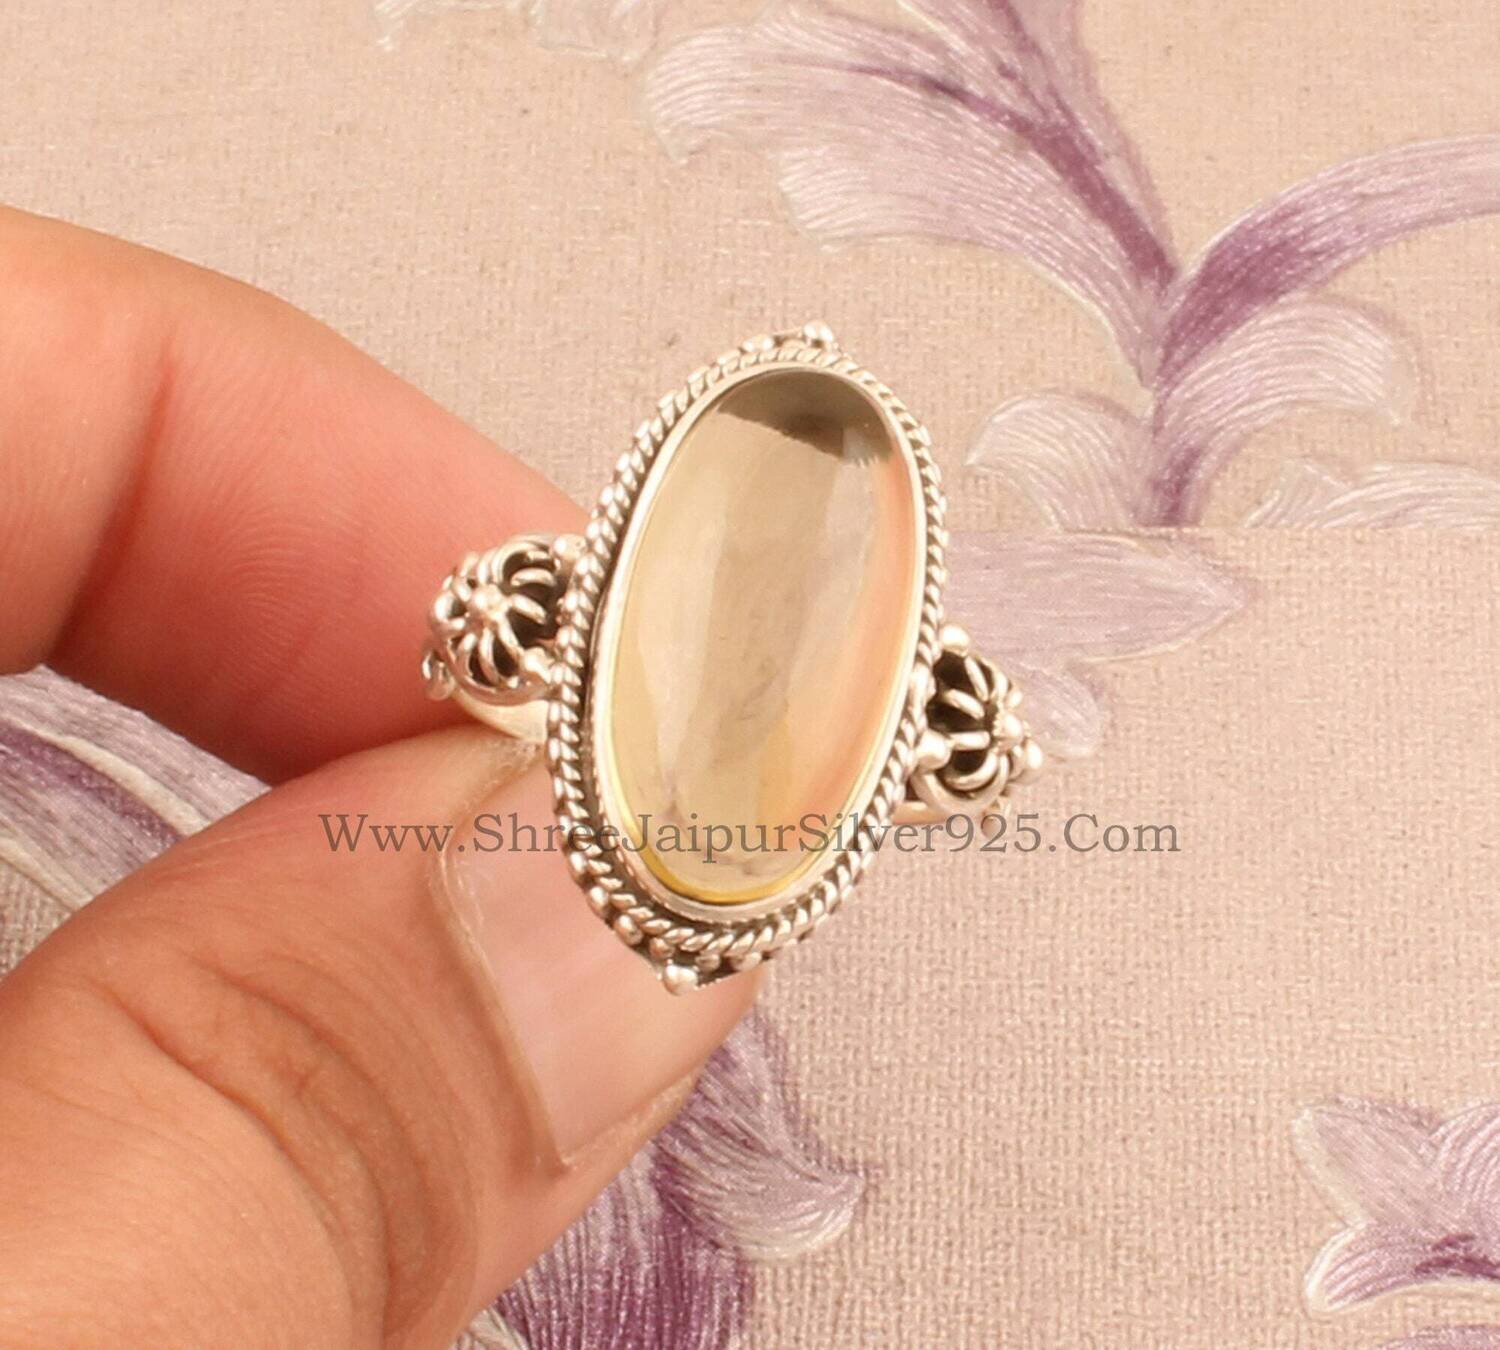 925 Sterling Silver Rings For Women Citrine Ring Oval Handmade Silver Gemstone Jewelry Engagement Vintage Dainty Citrine Ring For Gift Idea